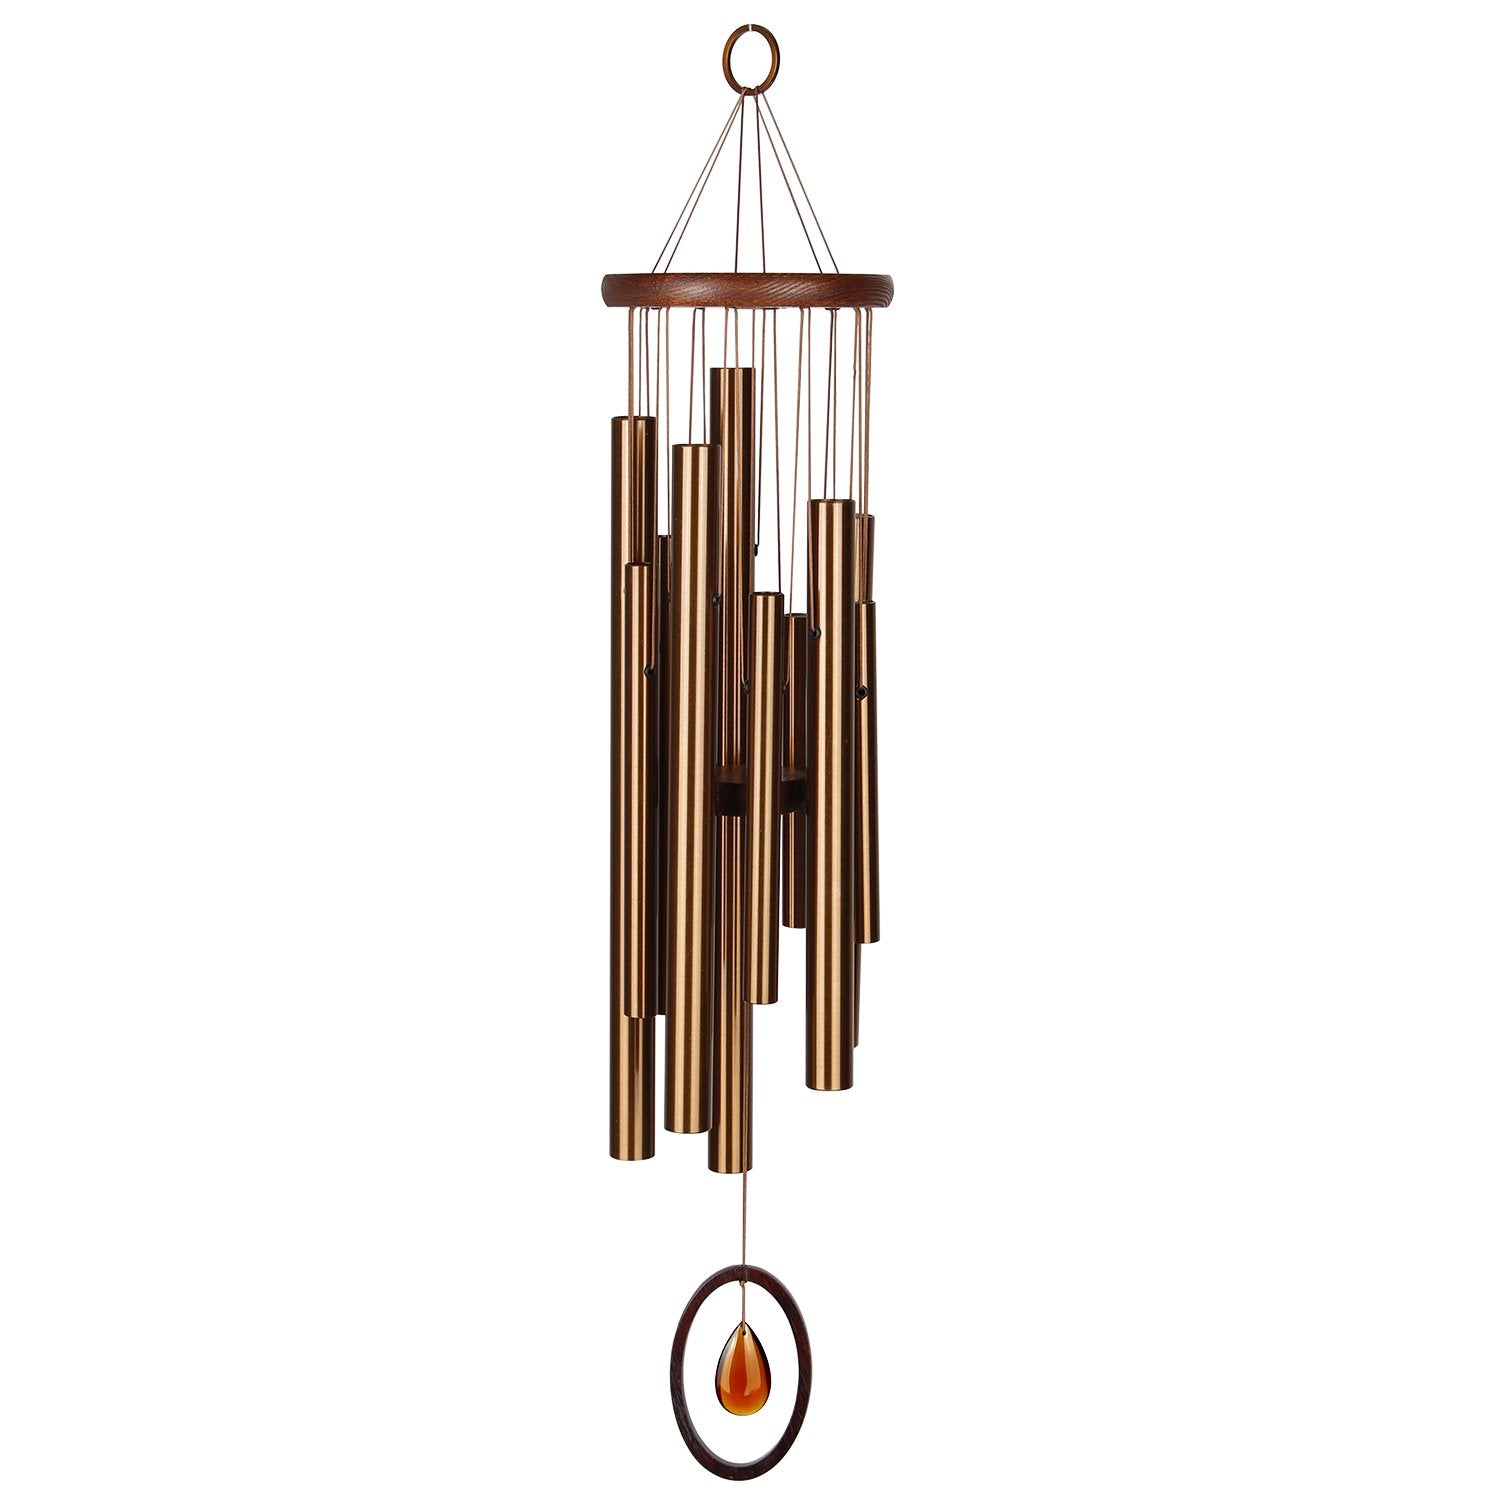 Chimes of Crystal Silence™ - Bronze full product image